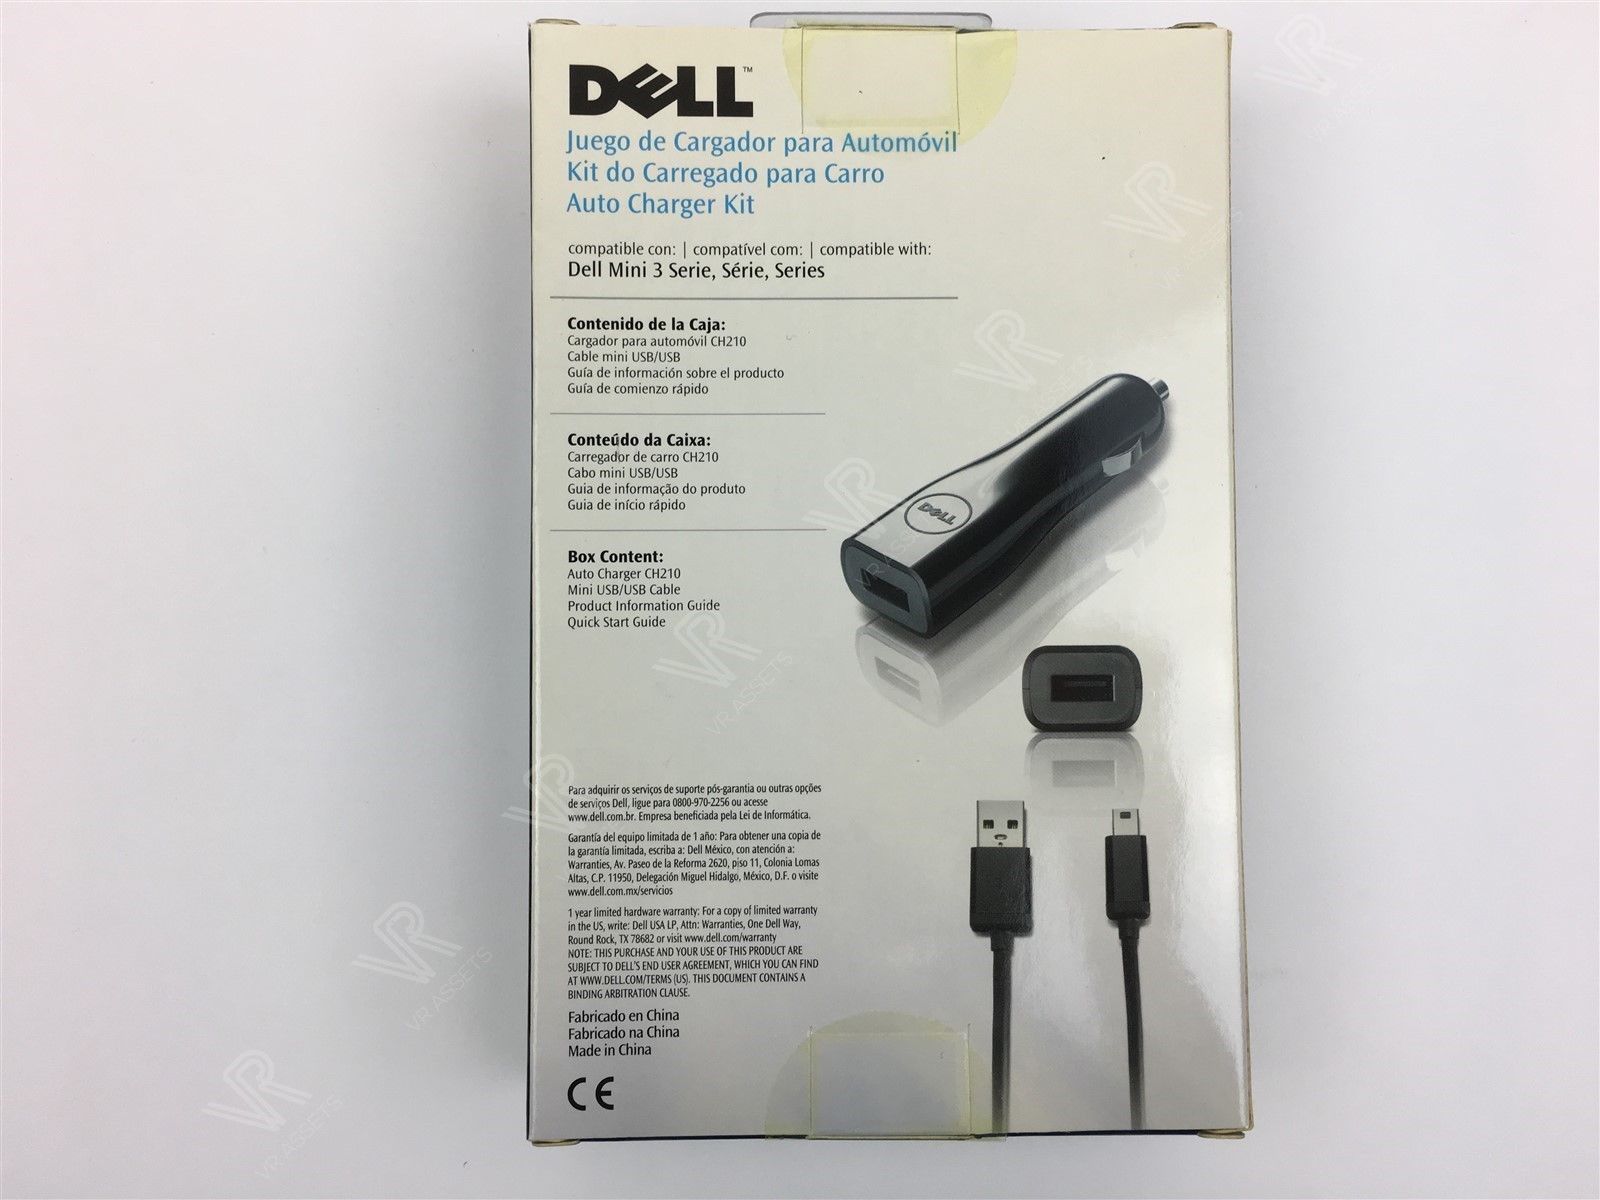 Dell Mini 3 Series Mini USB Cable w/Car Charger DC Power Adapter CH210 795J4 NEW